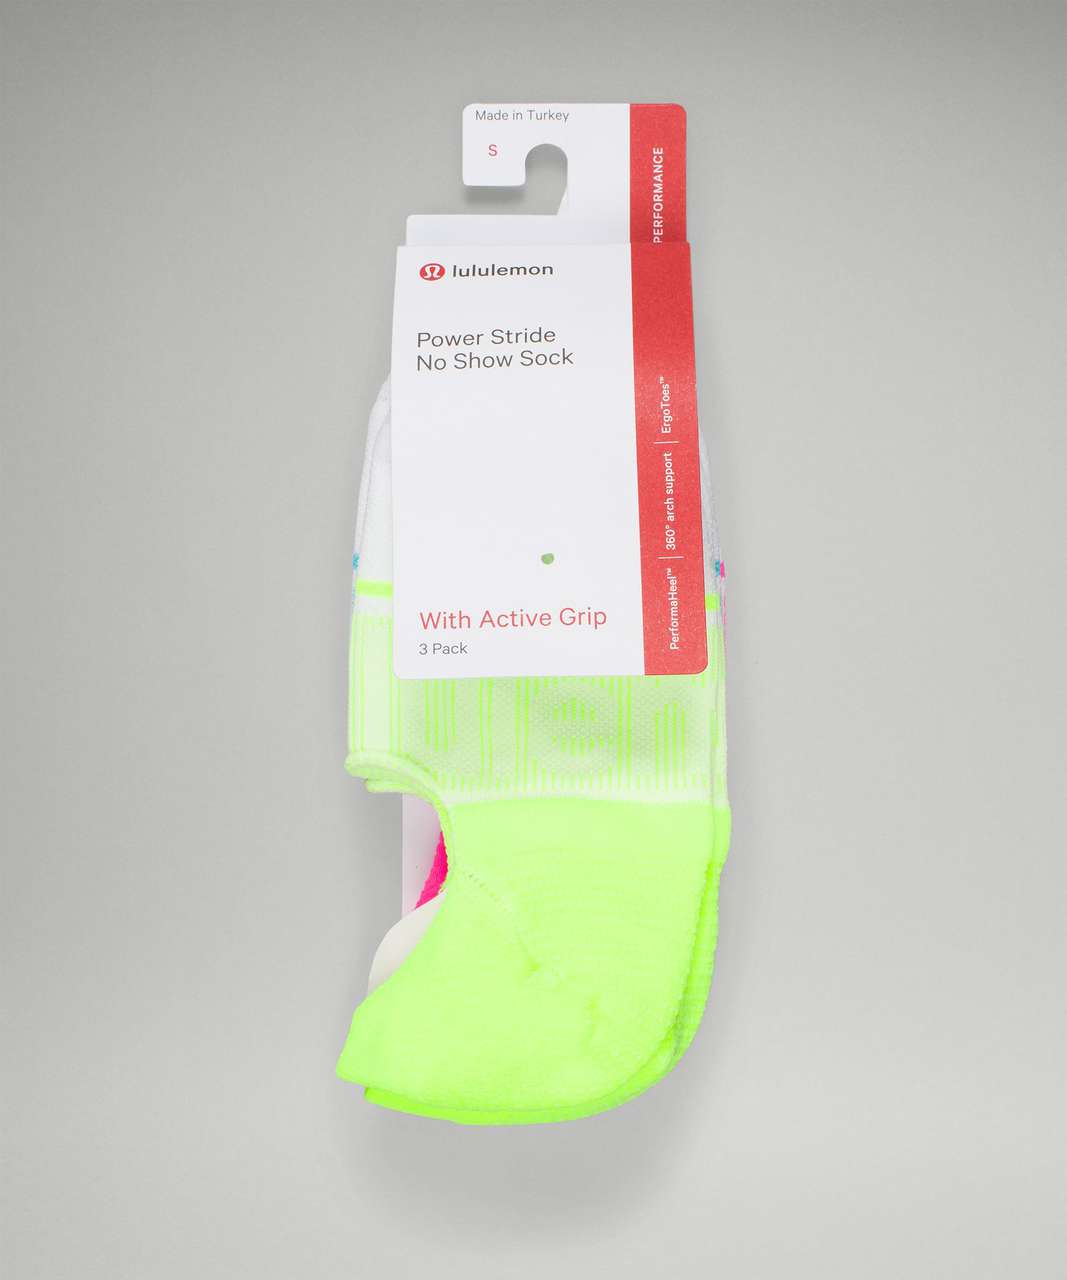 Lululemon Power Stride No-Show Sock with Active Grip 3 Pack *Multi-Colour - Highlight Yellow / Electric Turquoise / Highlight Pink